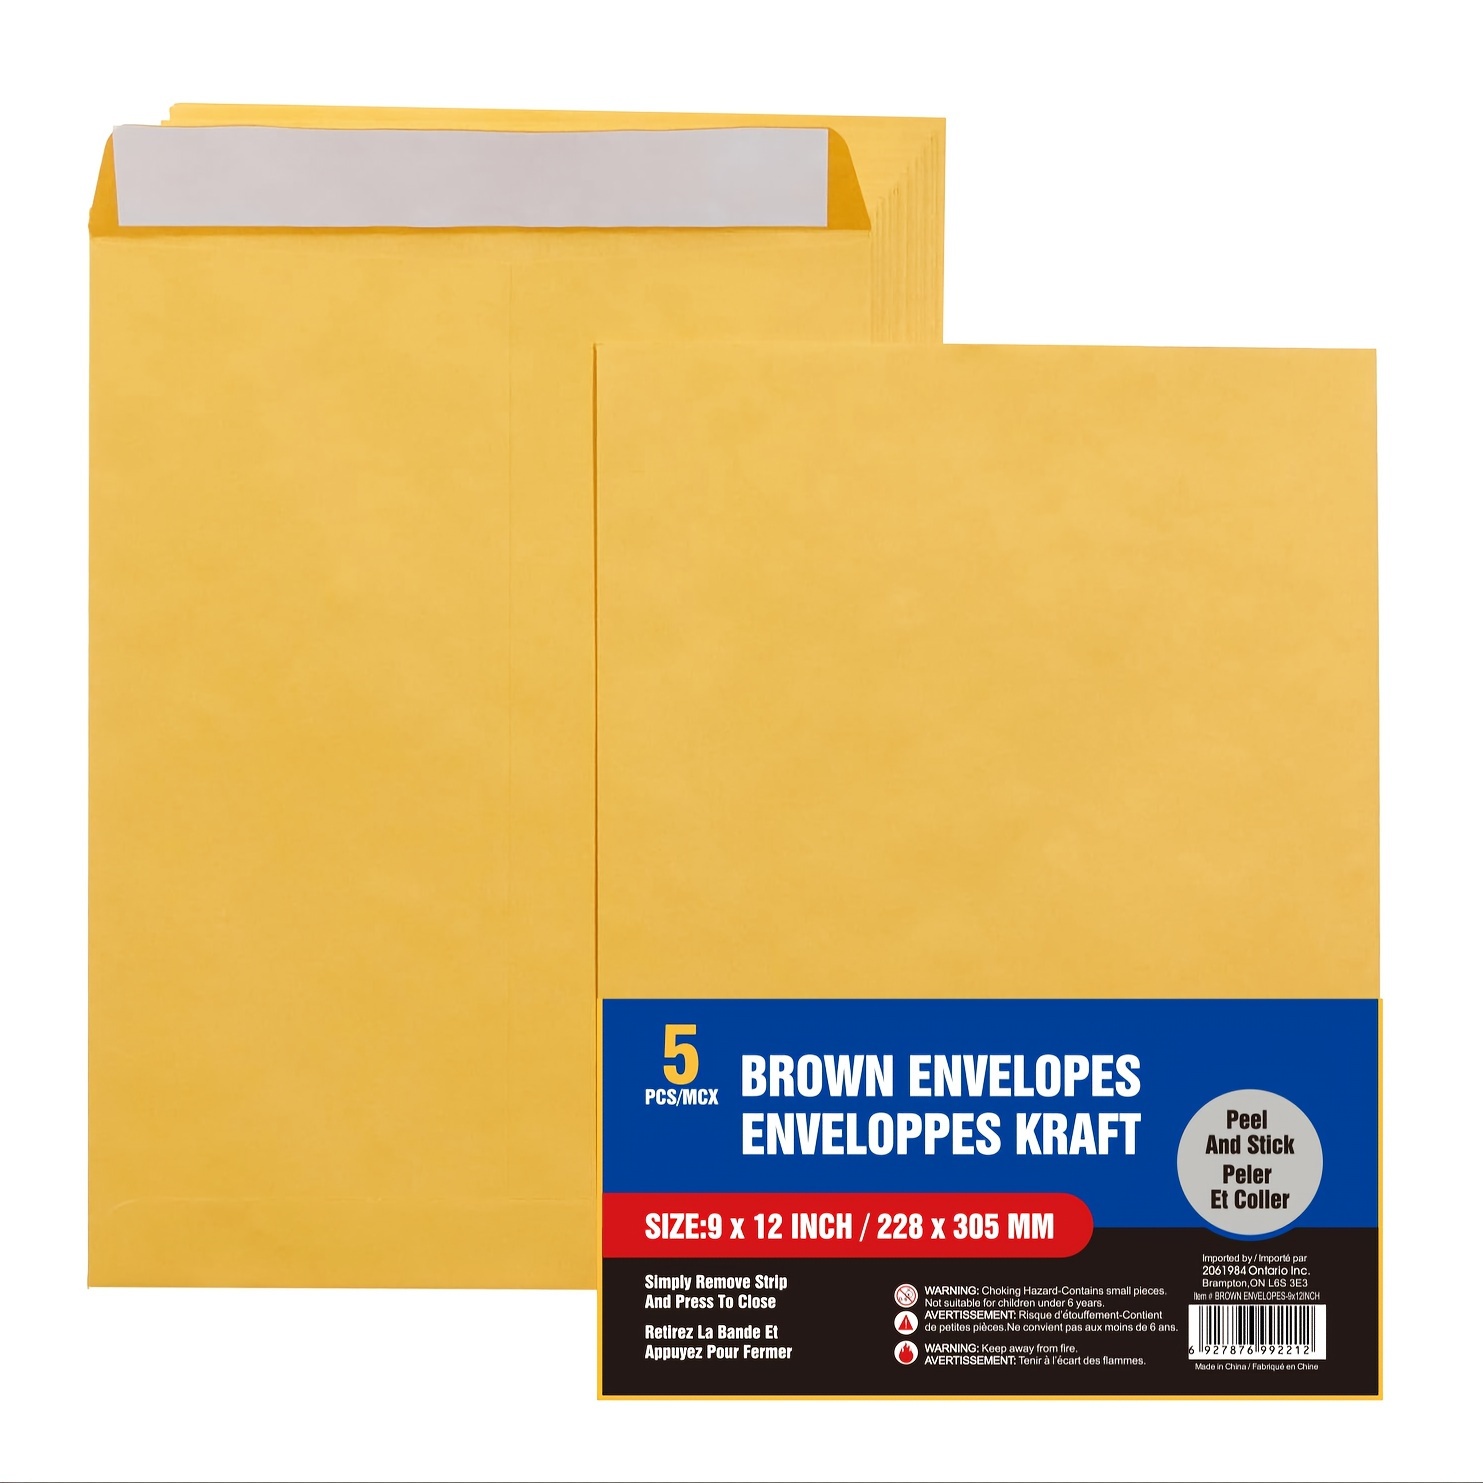 

5pcs Self-sealing Security Catalog Envelopes In 9x12 Inches With Tear-off And Sealable Flip Cover, Used For Mailing, Organizing, And Storing